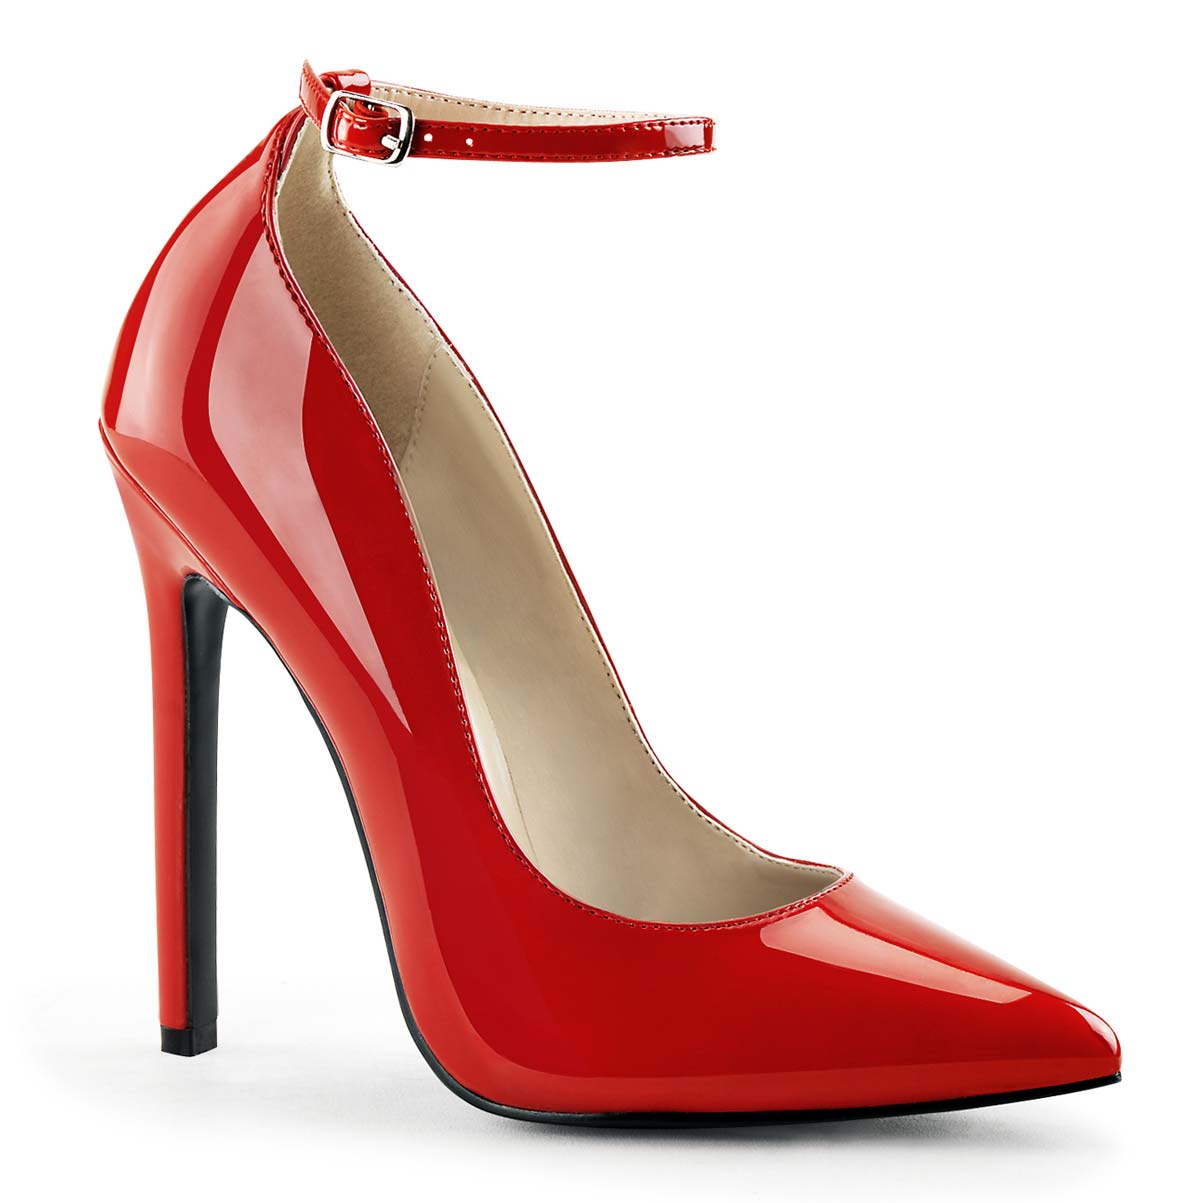 Pleaser SEXY-23 - Red Patent in Sexy Heels & Platforms - $43.11